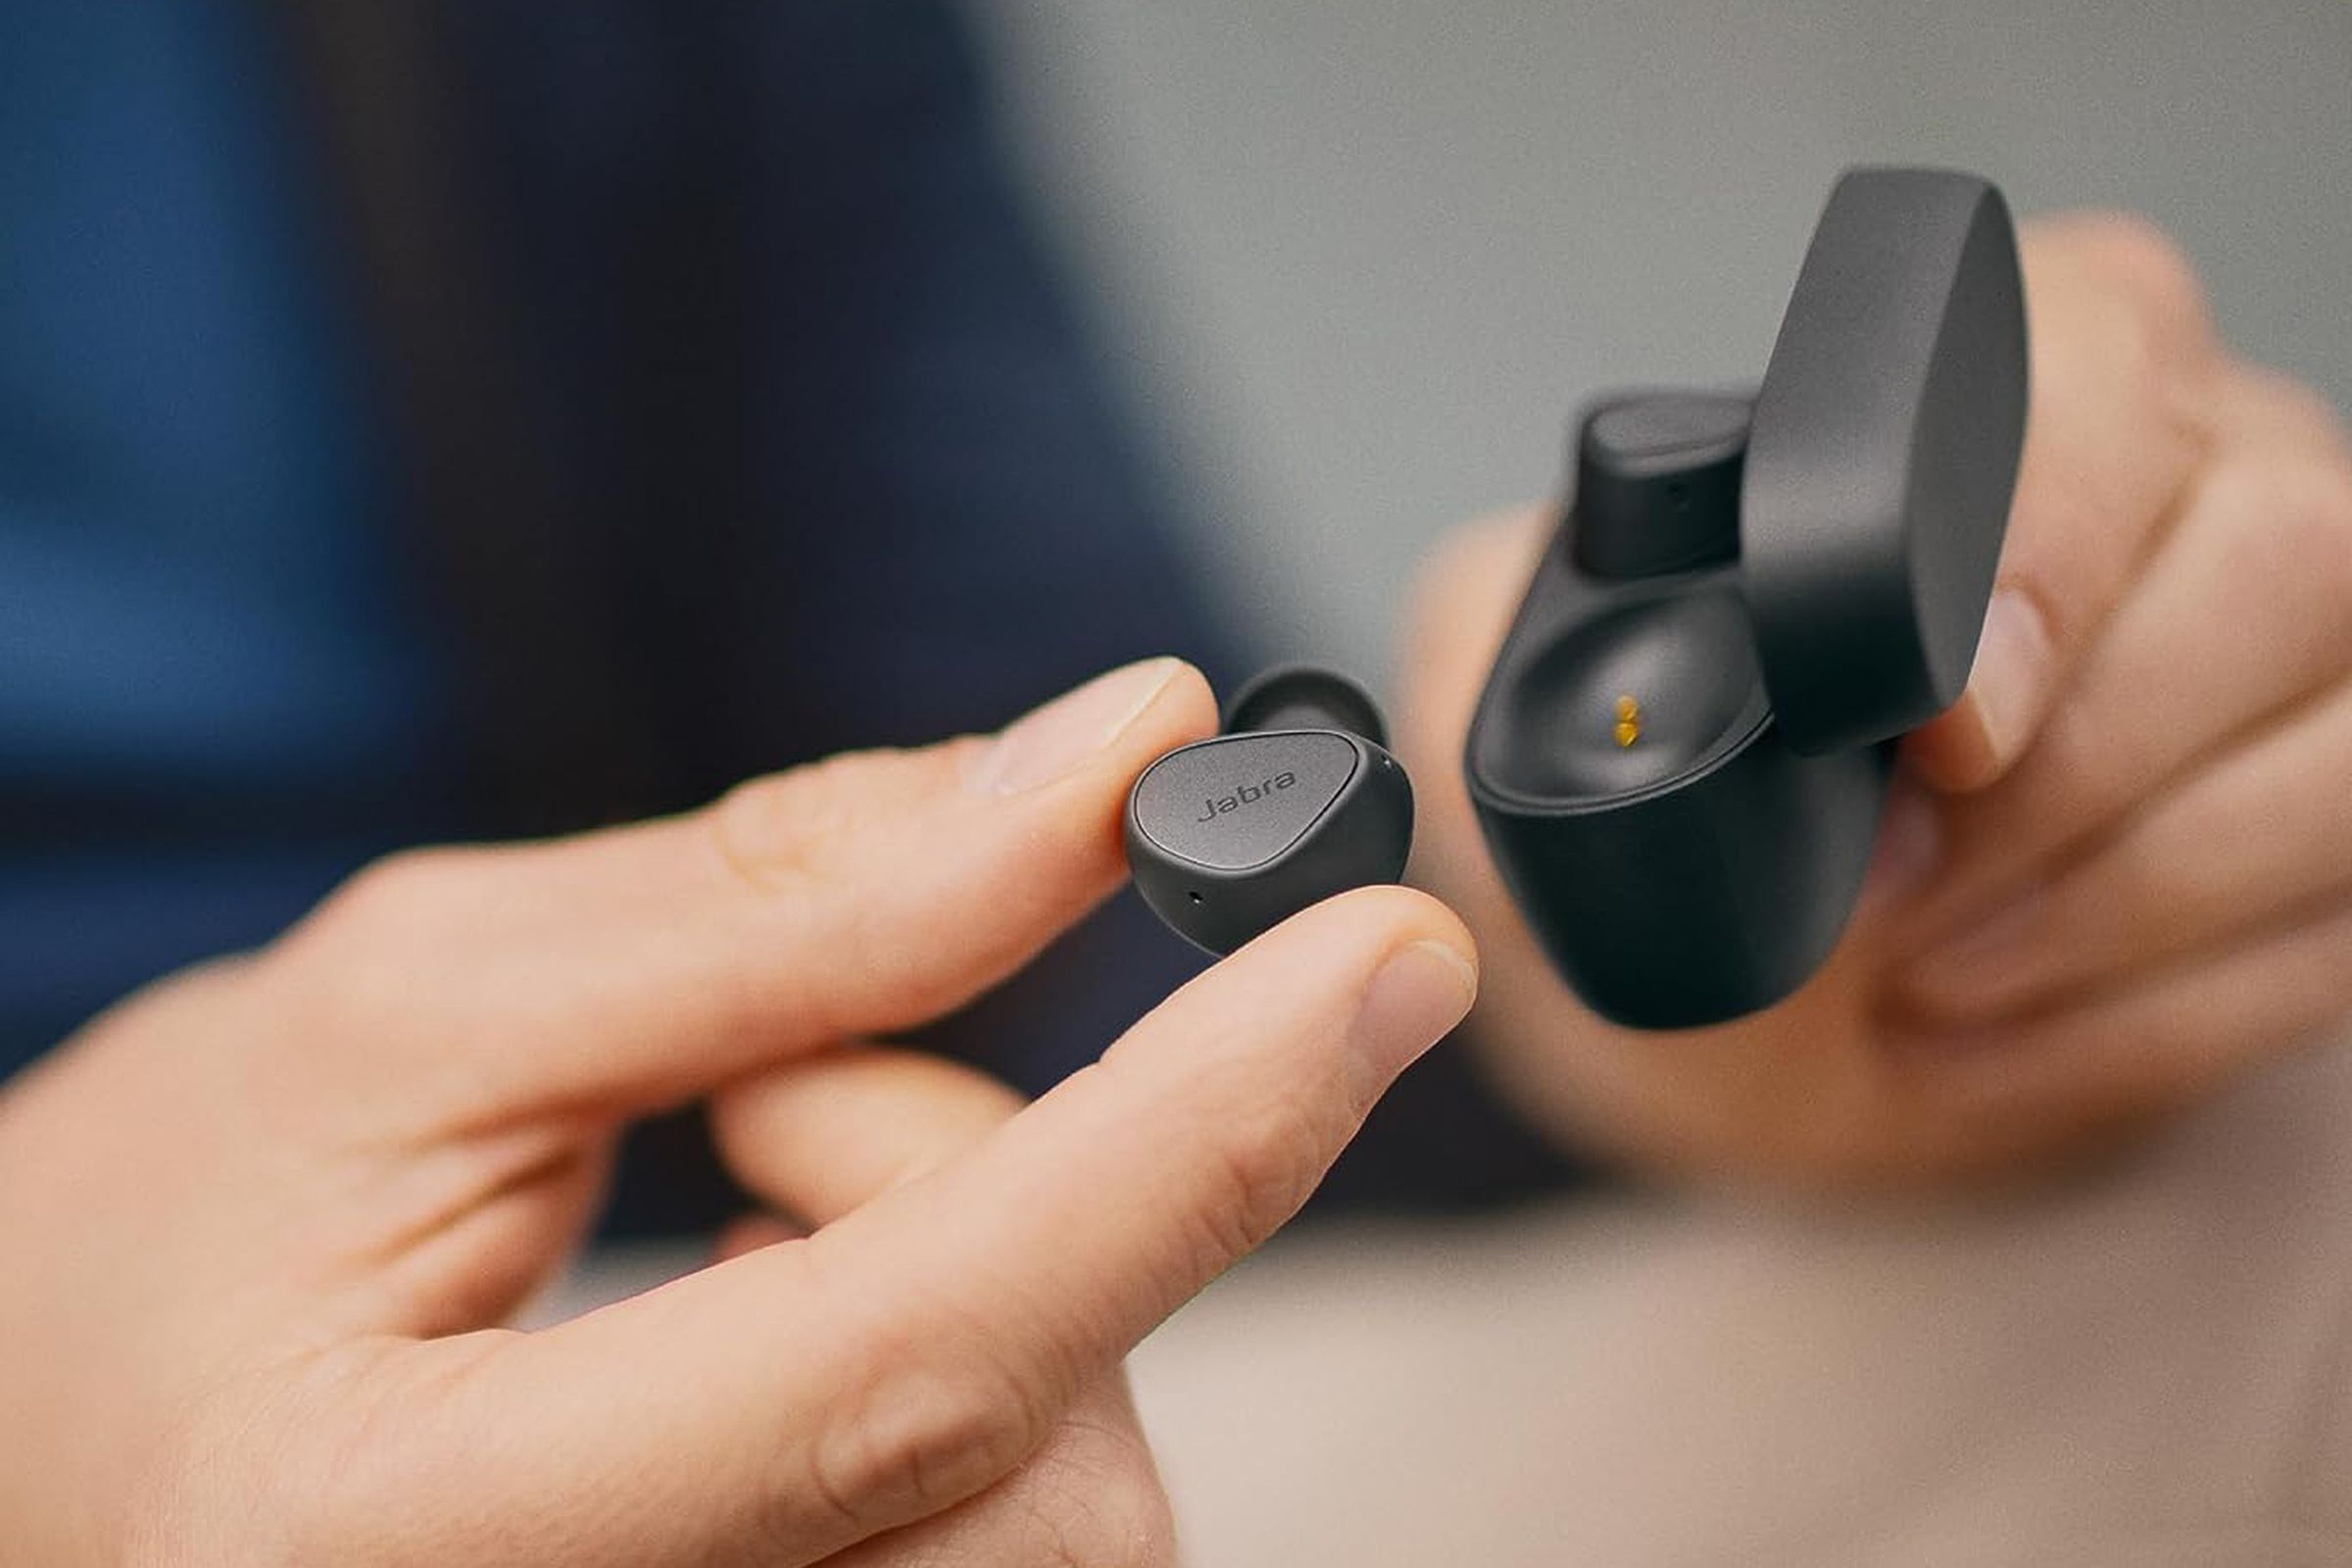 Cyber Monday deal knocks $100 off the Oura smart ring - The Manual